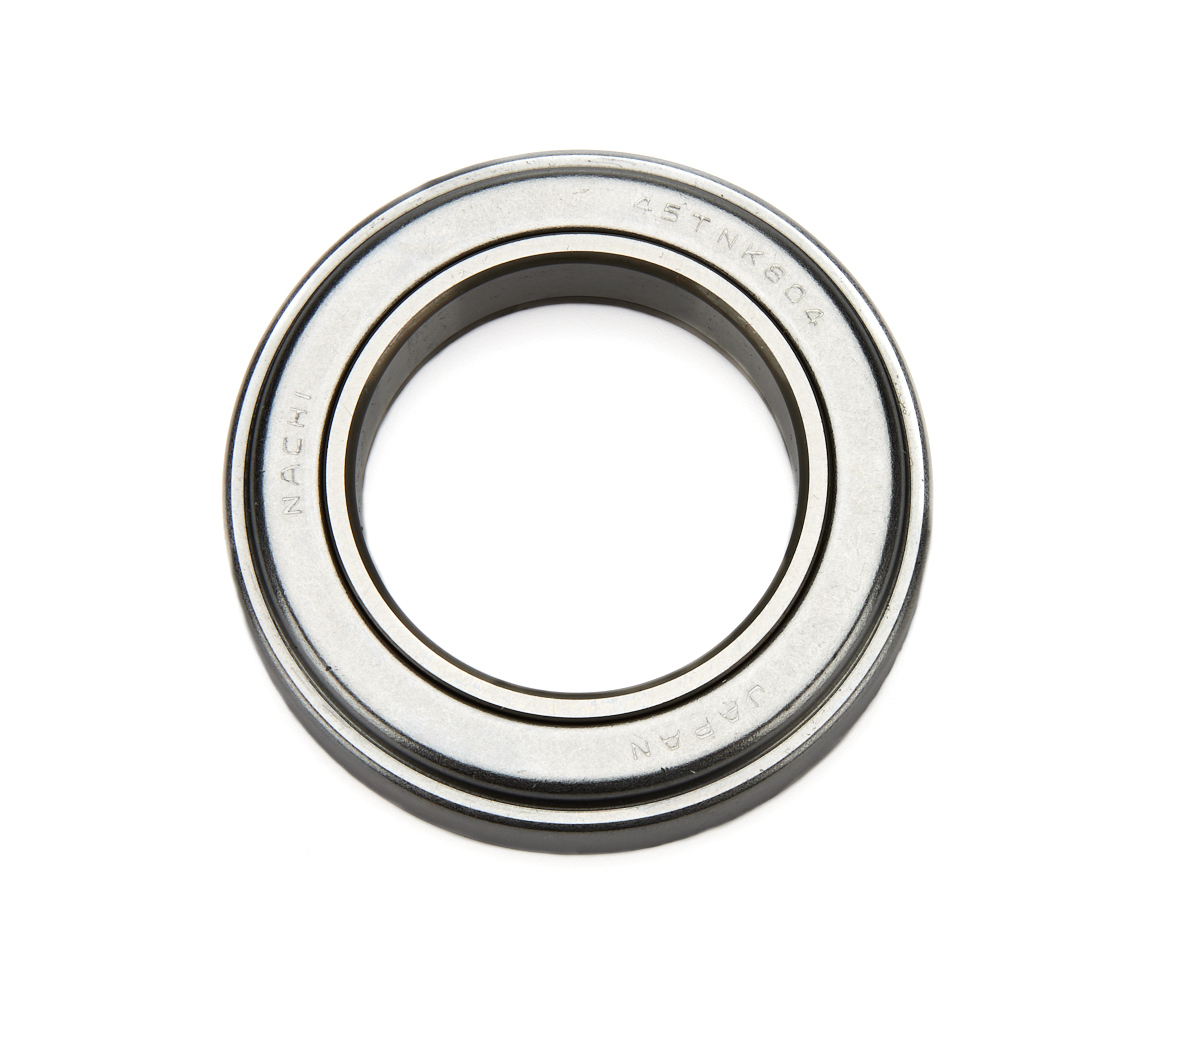 Quarter Master 106033 Throwout Bearing, Replacement Bearing Only, Quarter Master 721-Series Throwout Bearings, Each